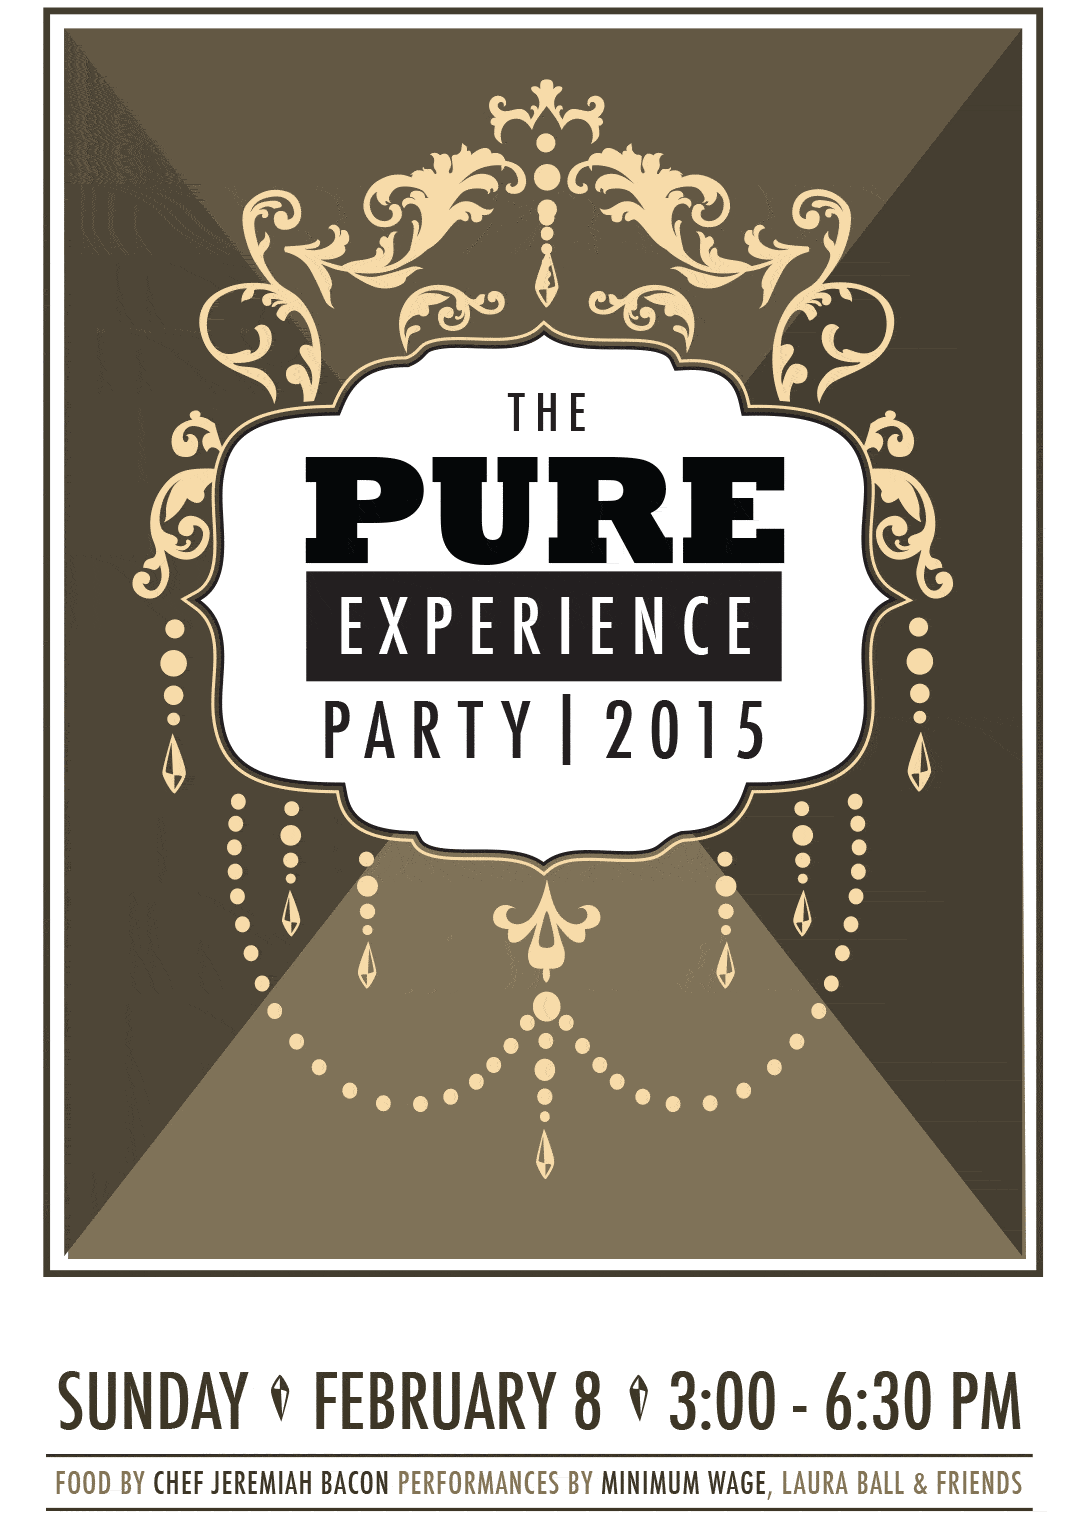 The PURE Experience Party